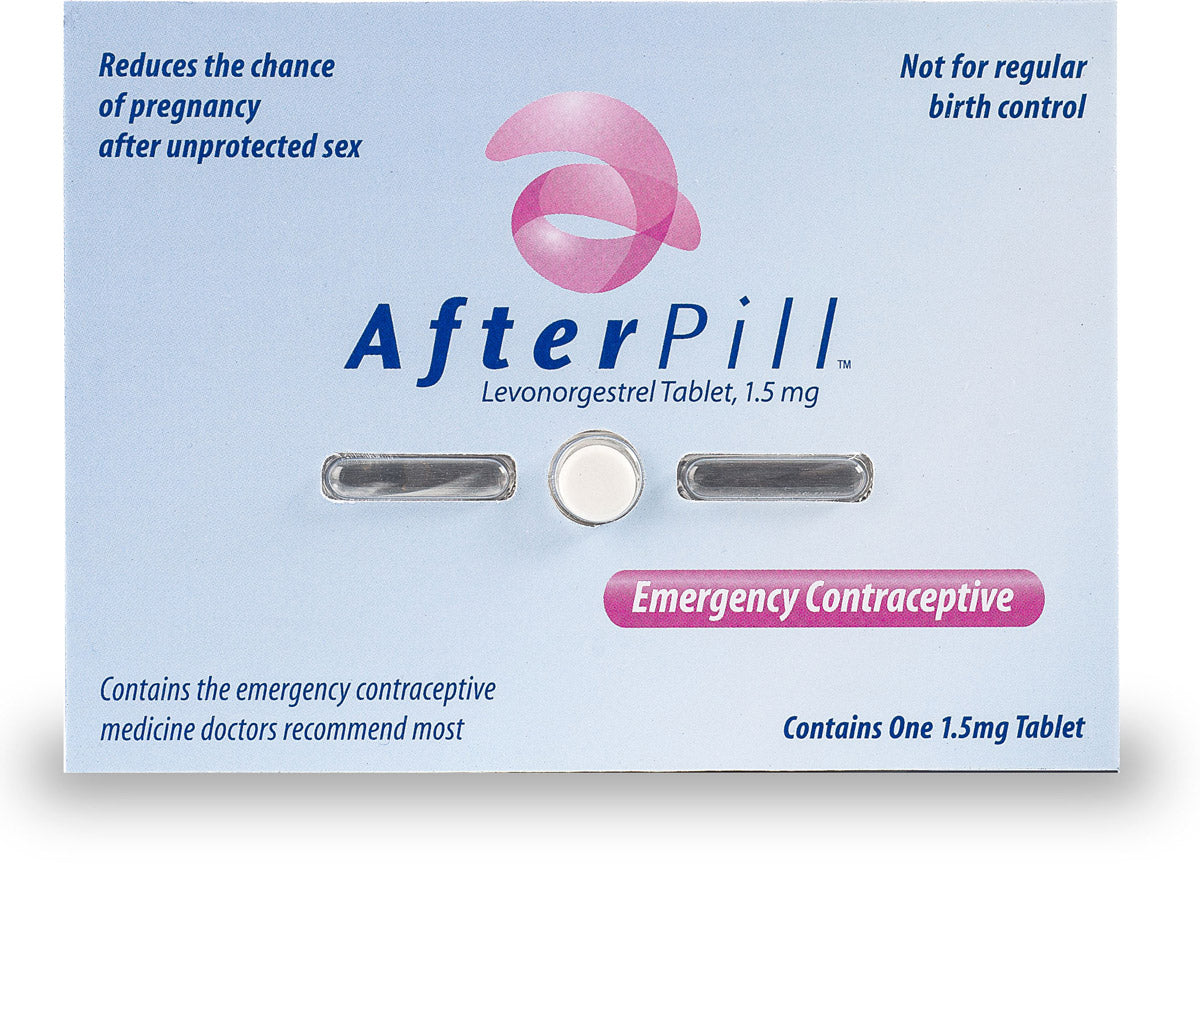 AfterPill Product Packaging